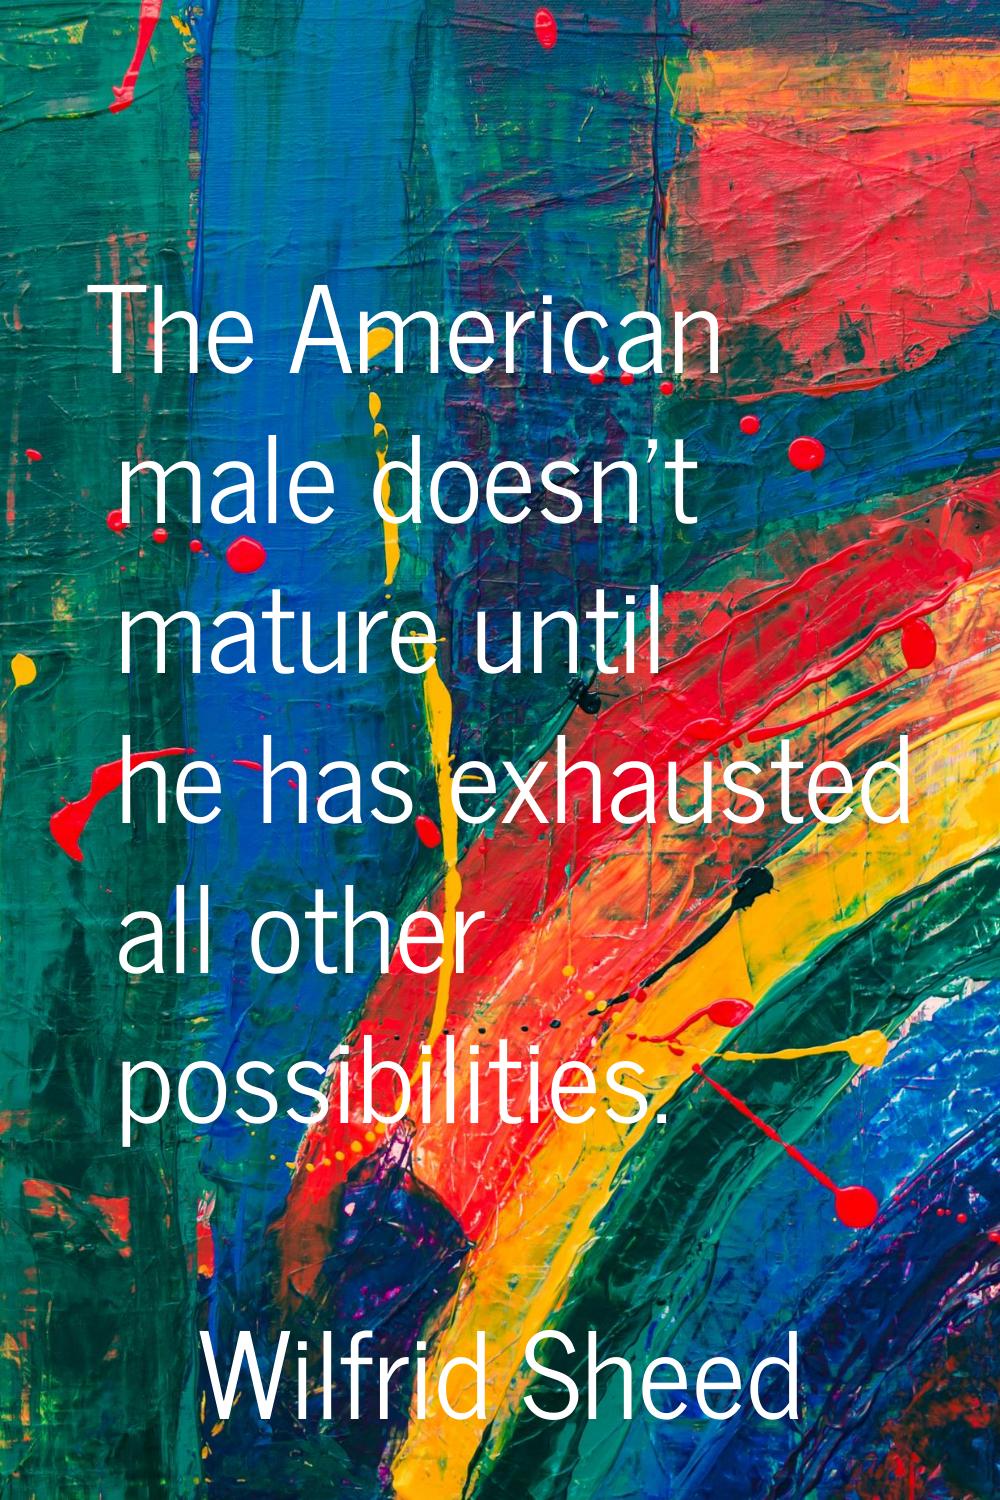 The American male doesn't mature until he has exhausted all other possibilities.